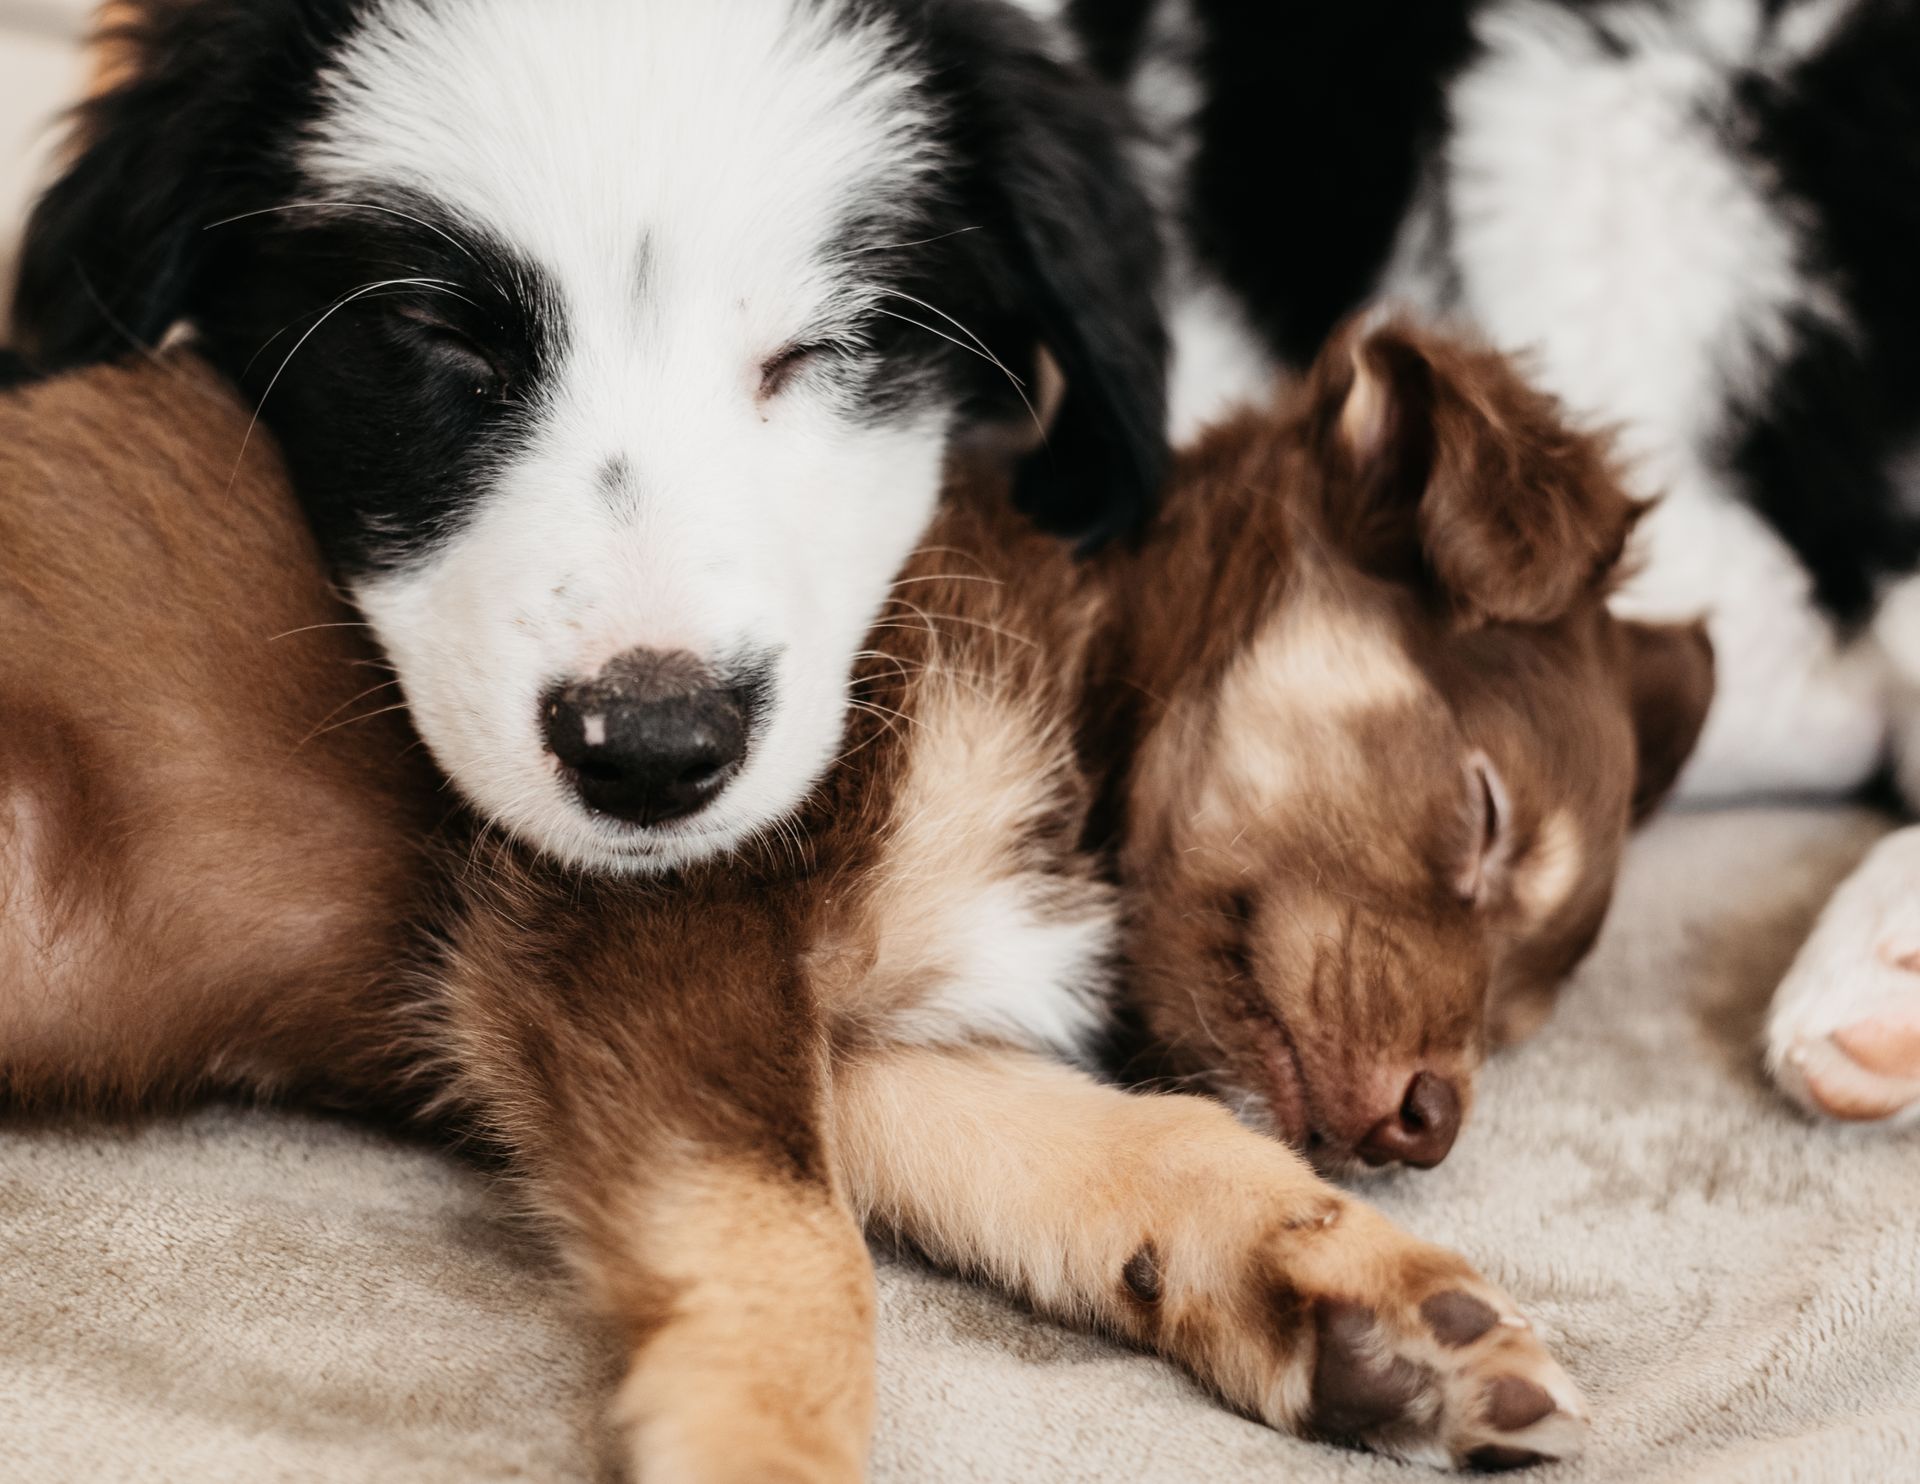 two puppies are sleeping next to each other on a blanket .